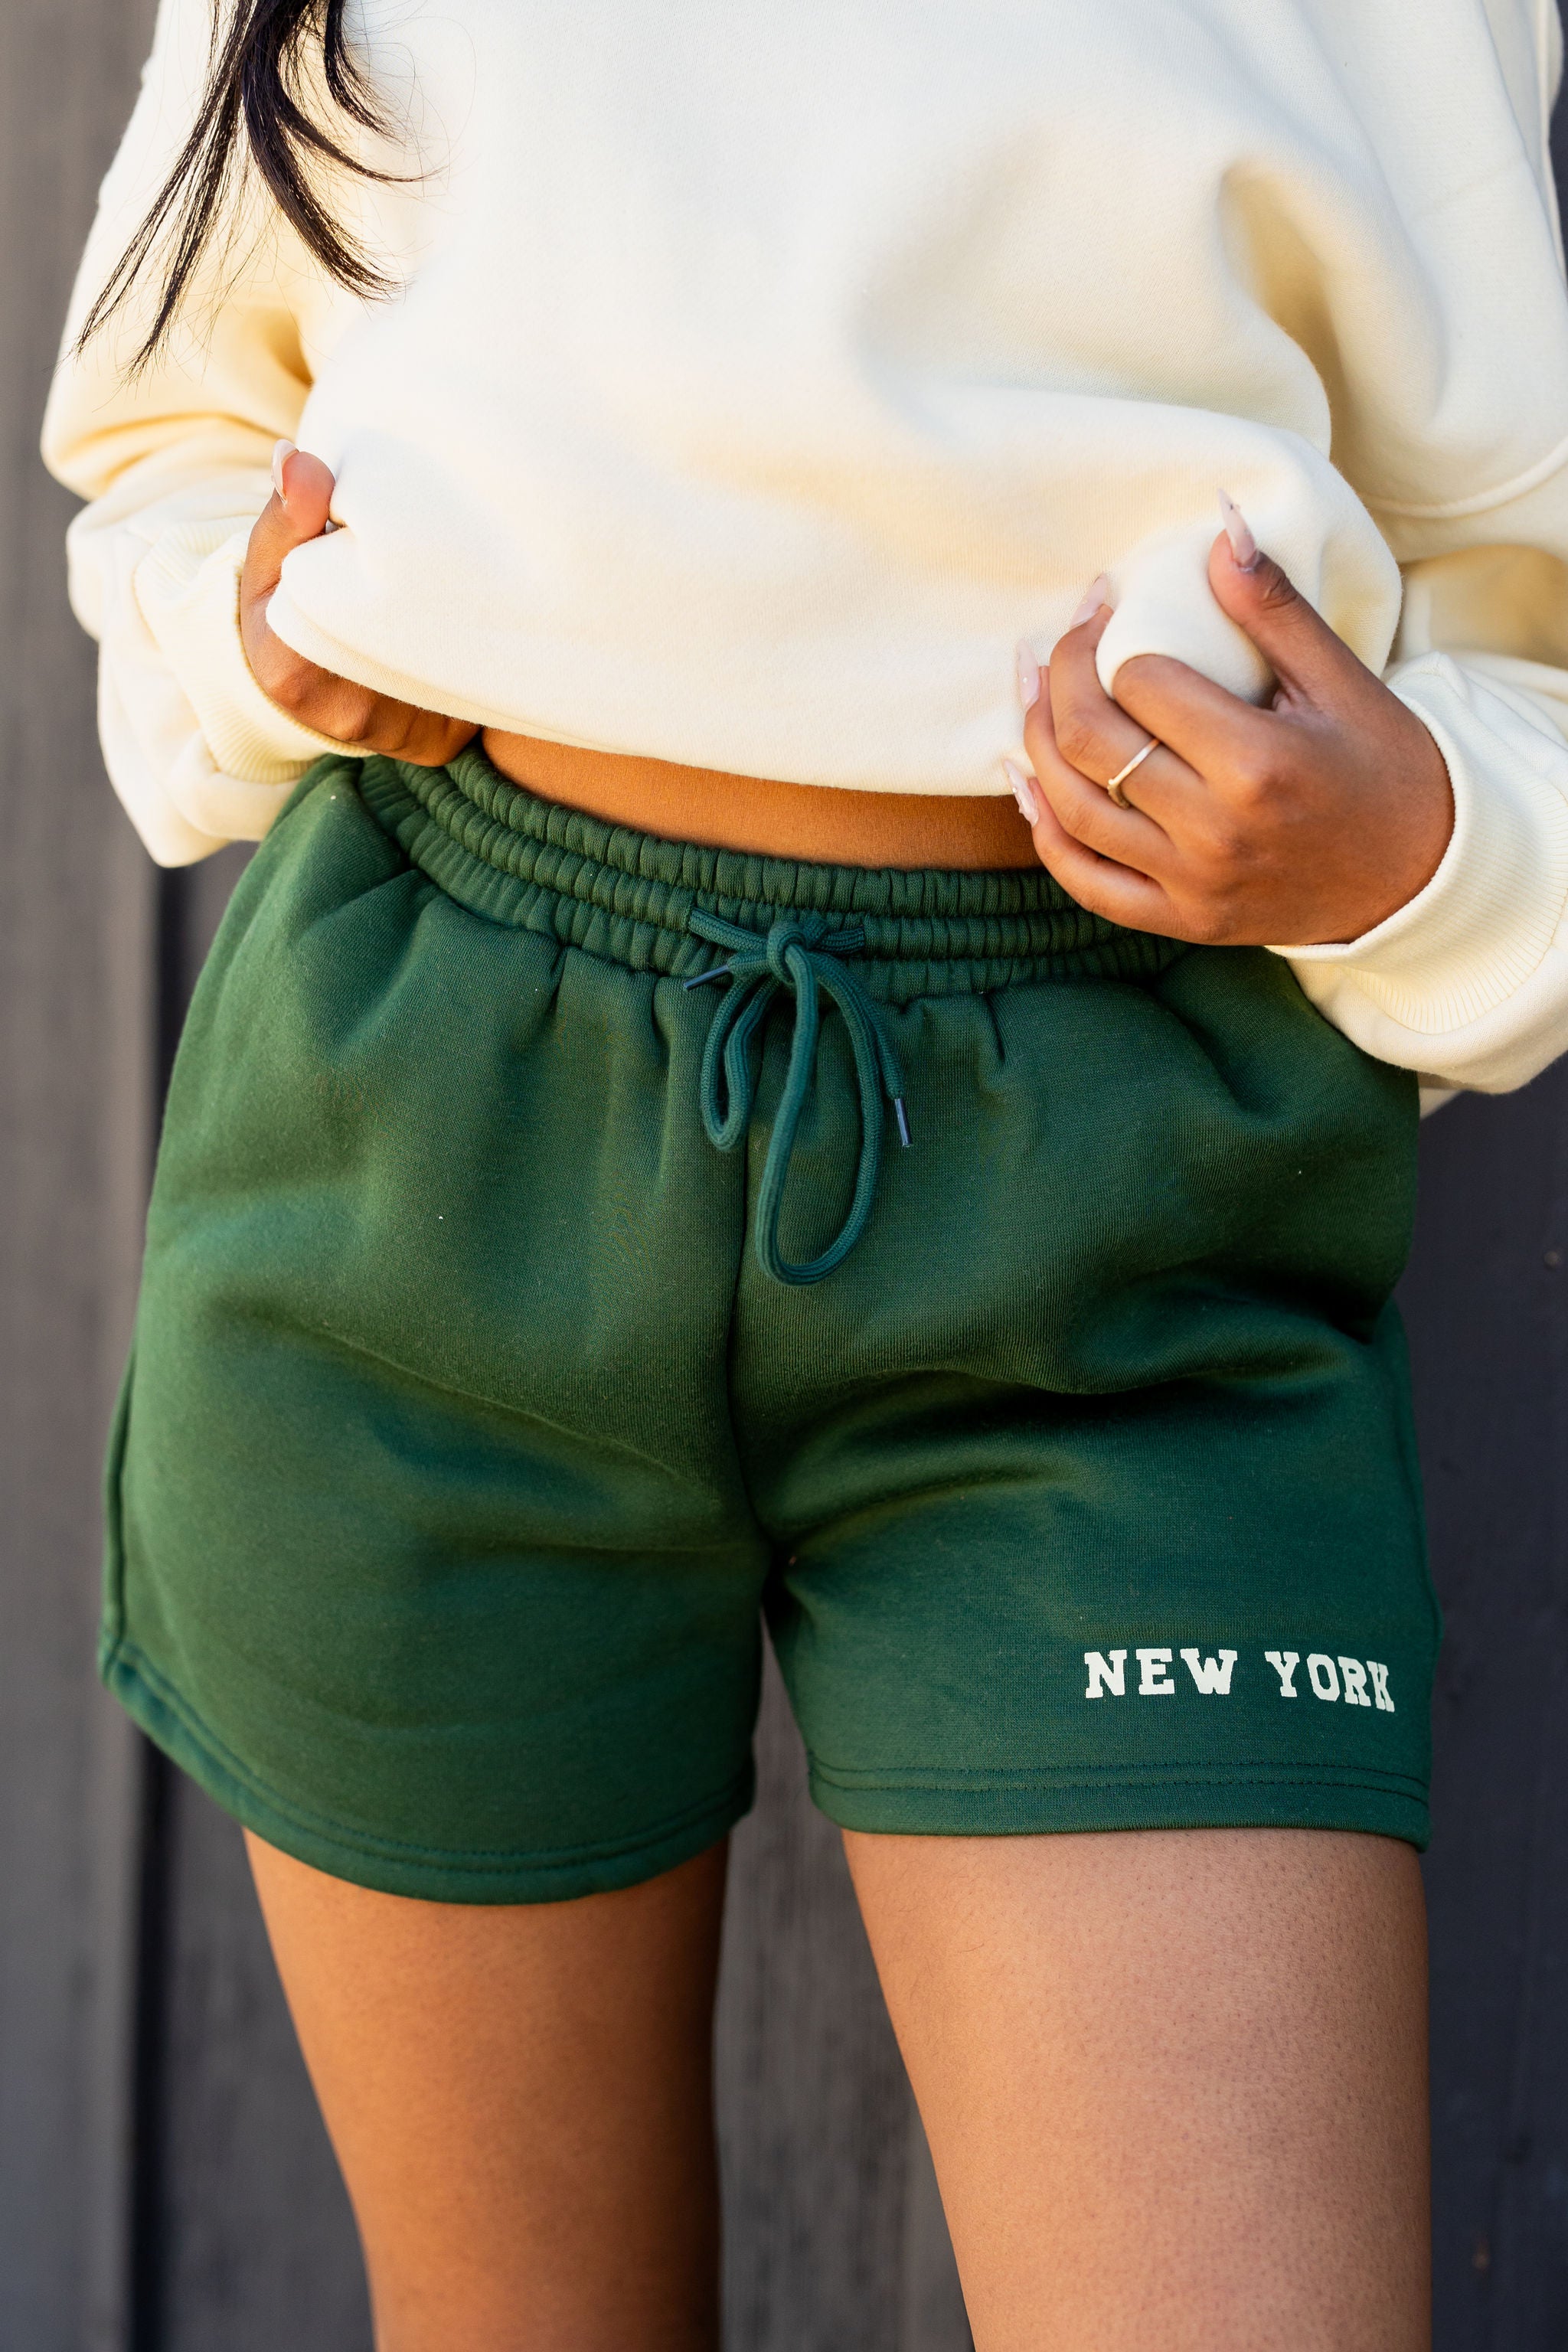 The New York High Rise Shorts